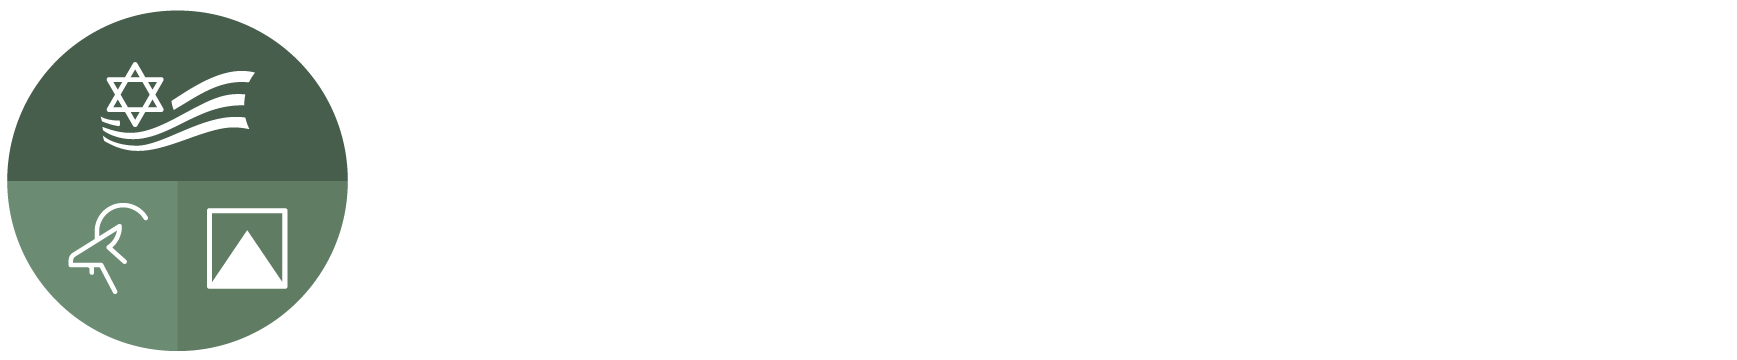 The Roots Cause Logo